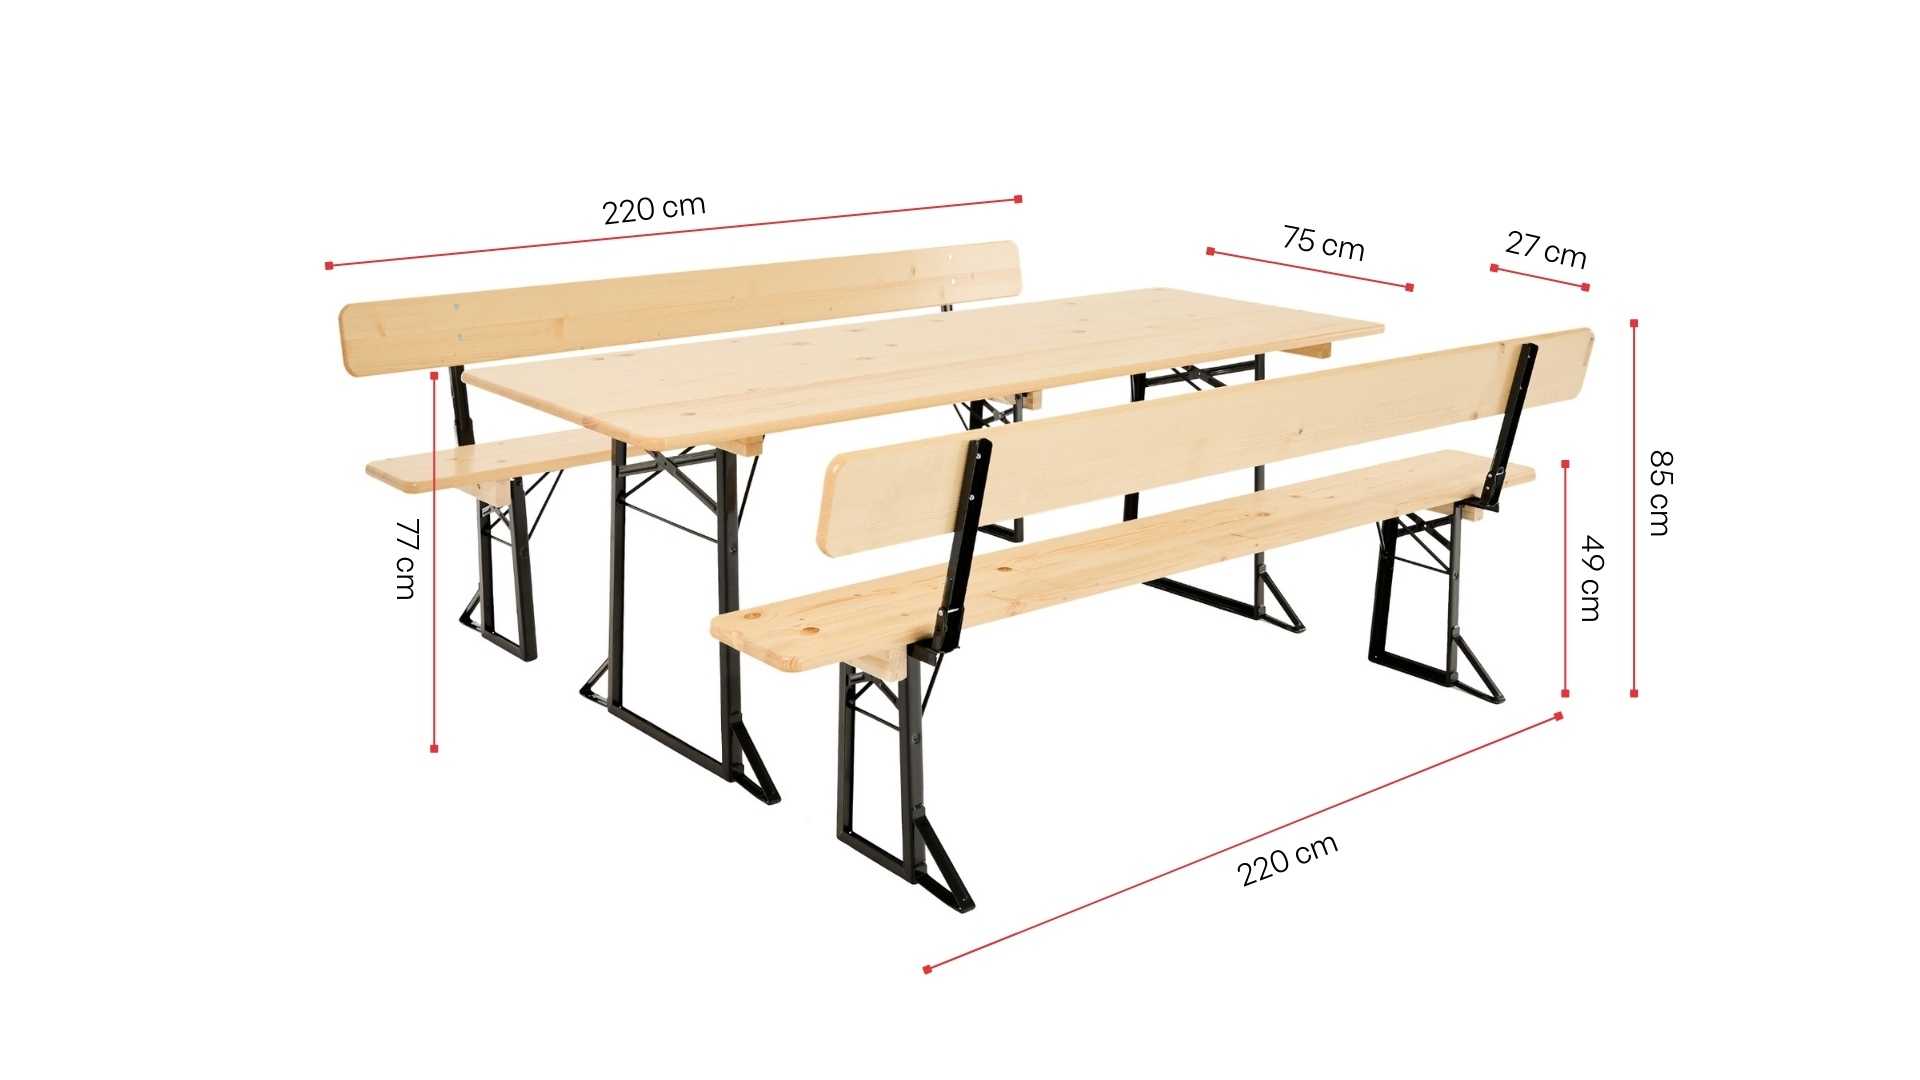 A wide beer garden table sets with backrest is shown with its dimensions in nature.